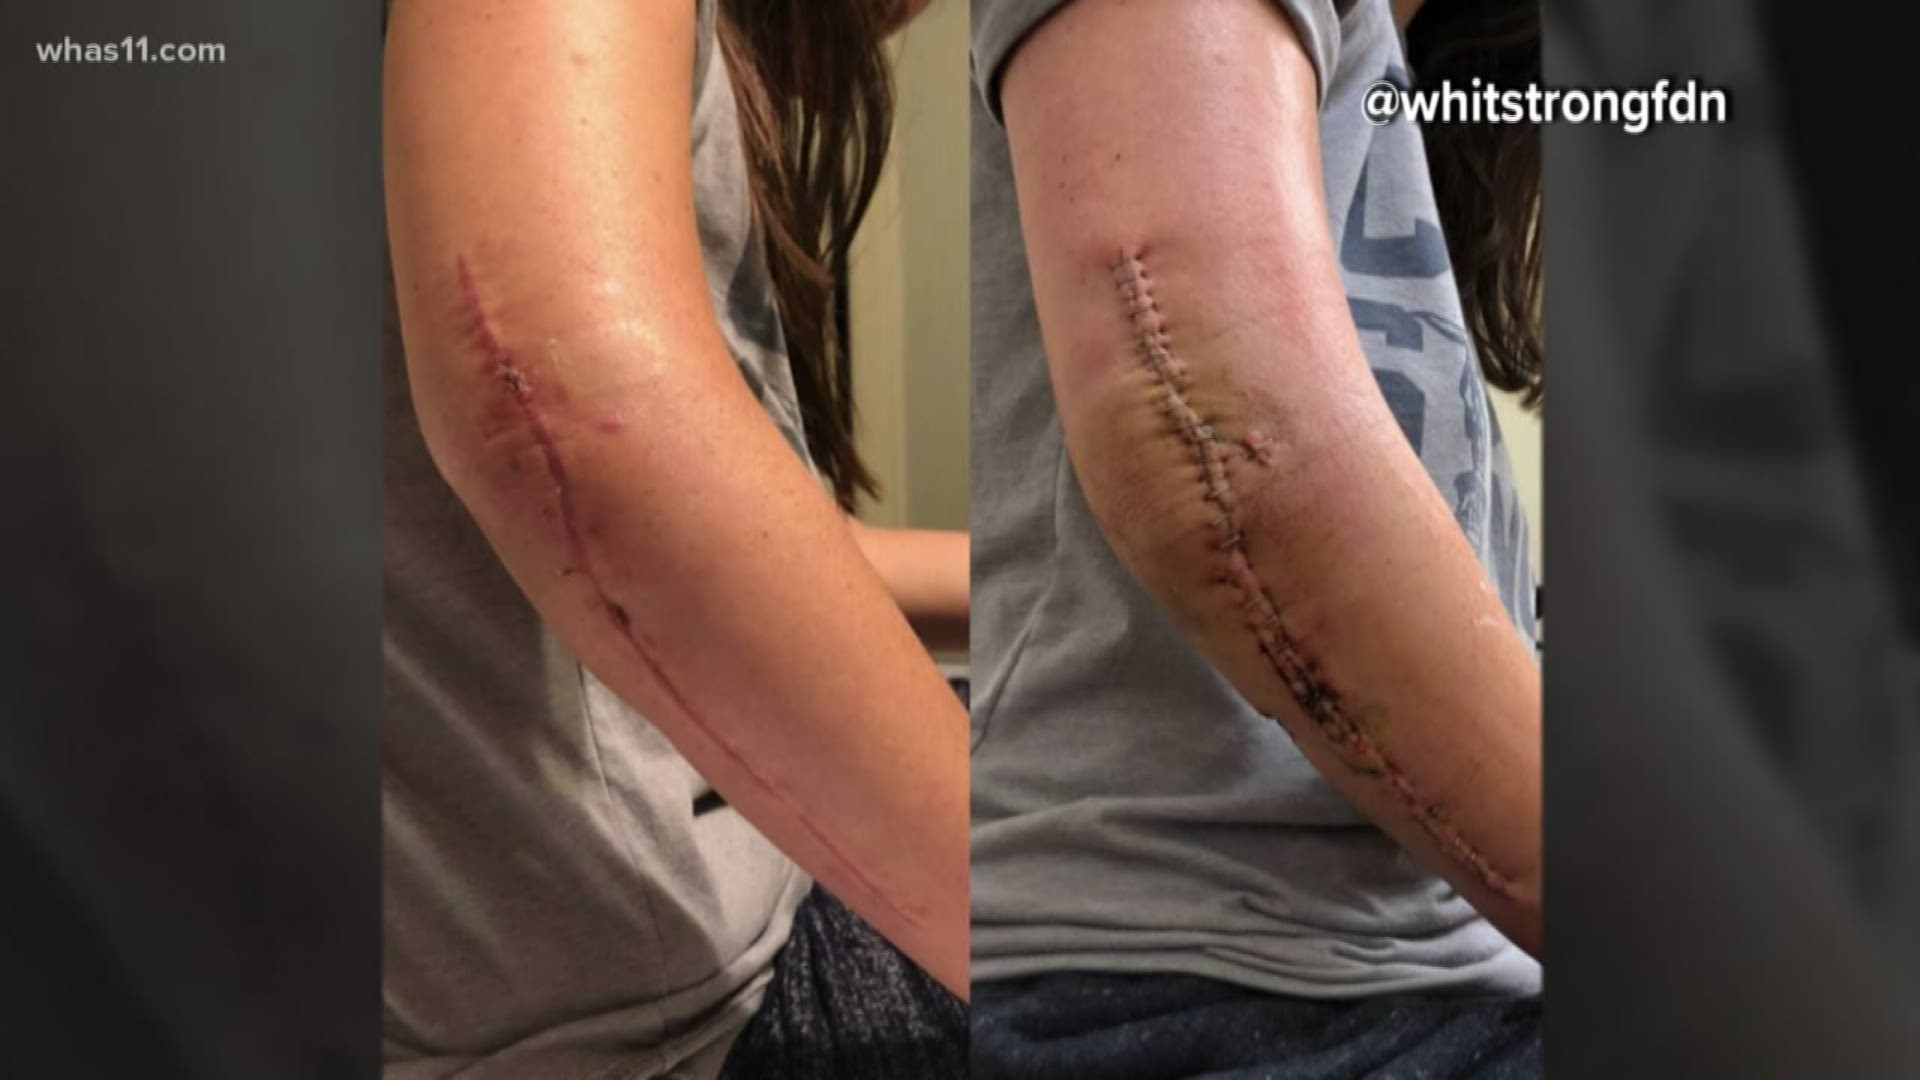 The recent picture shows her arm that sustained major trauma but is healing nicely.